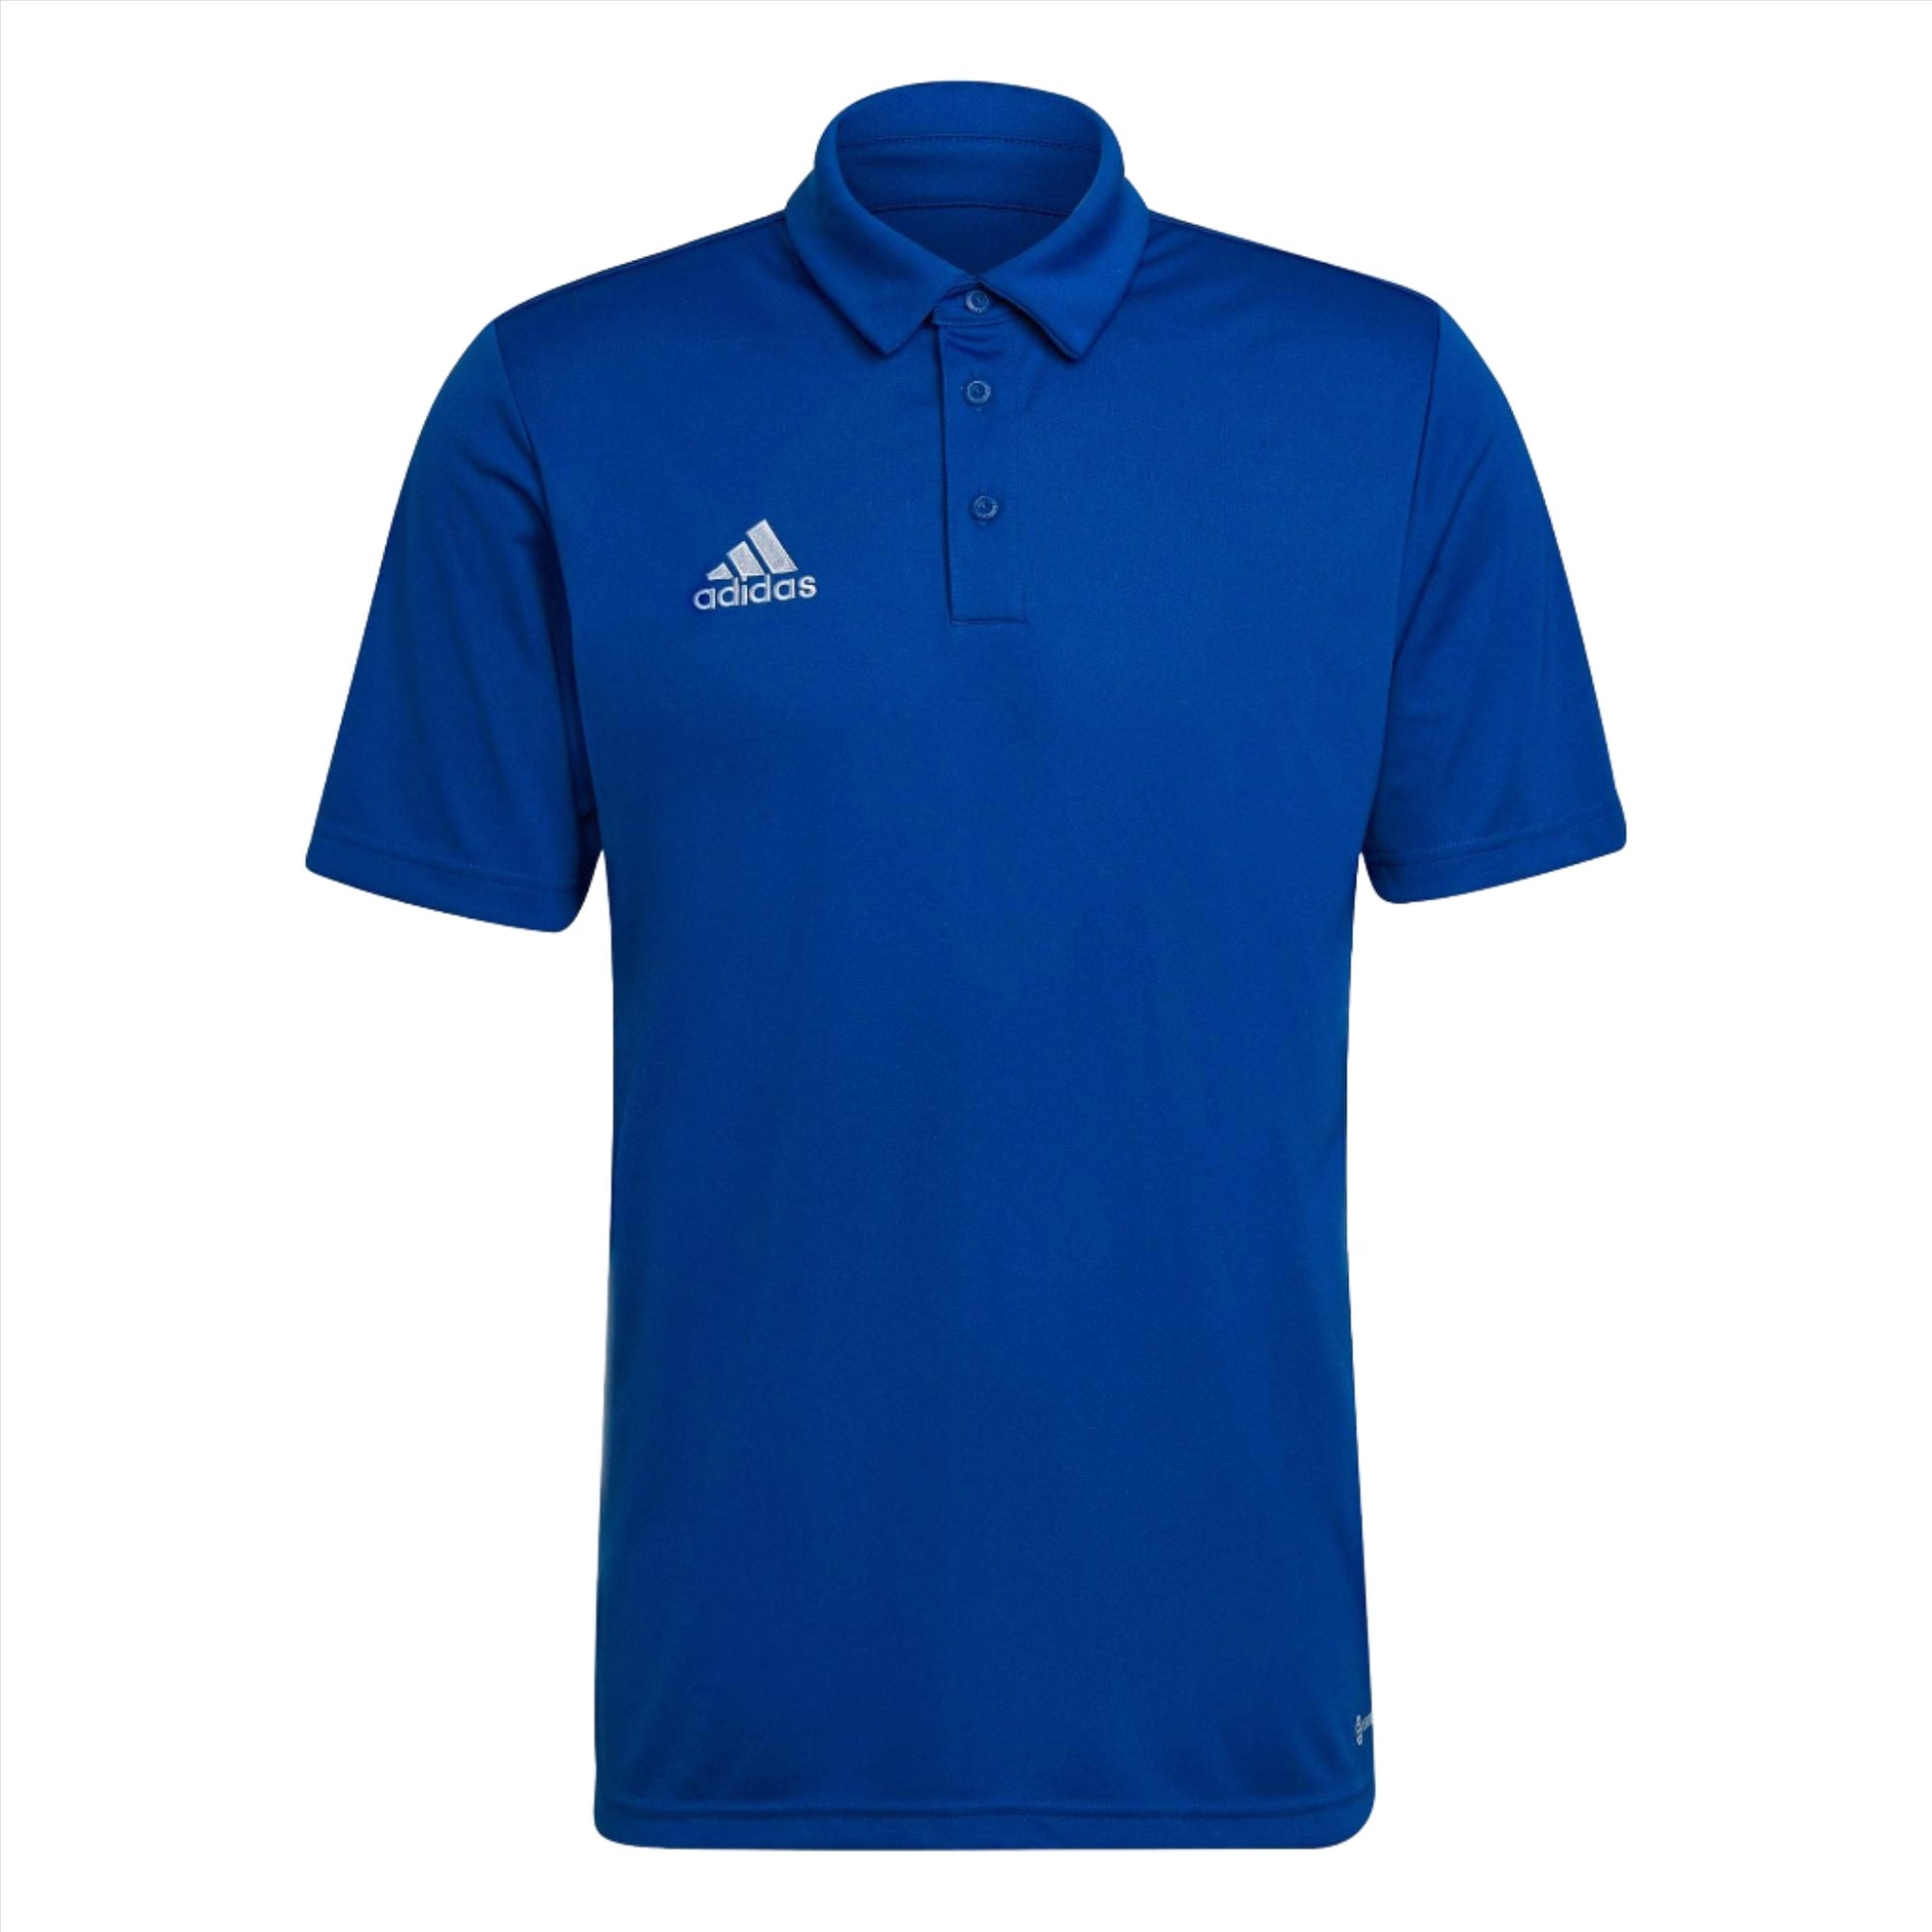 Entrada 22 Polo Shirt by Adidas - The Luxury Promotional Gifts Company Limited